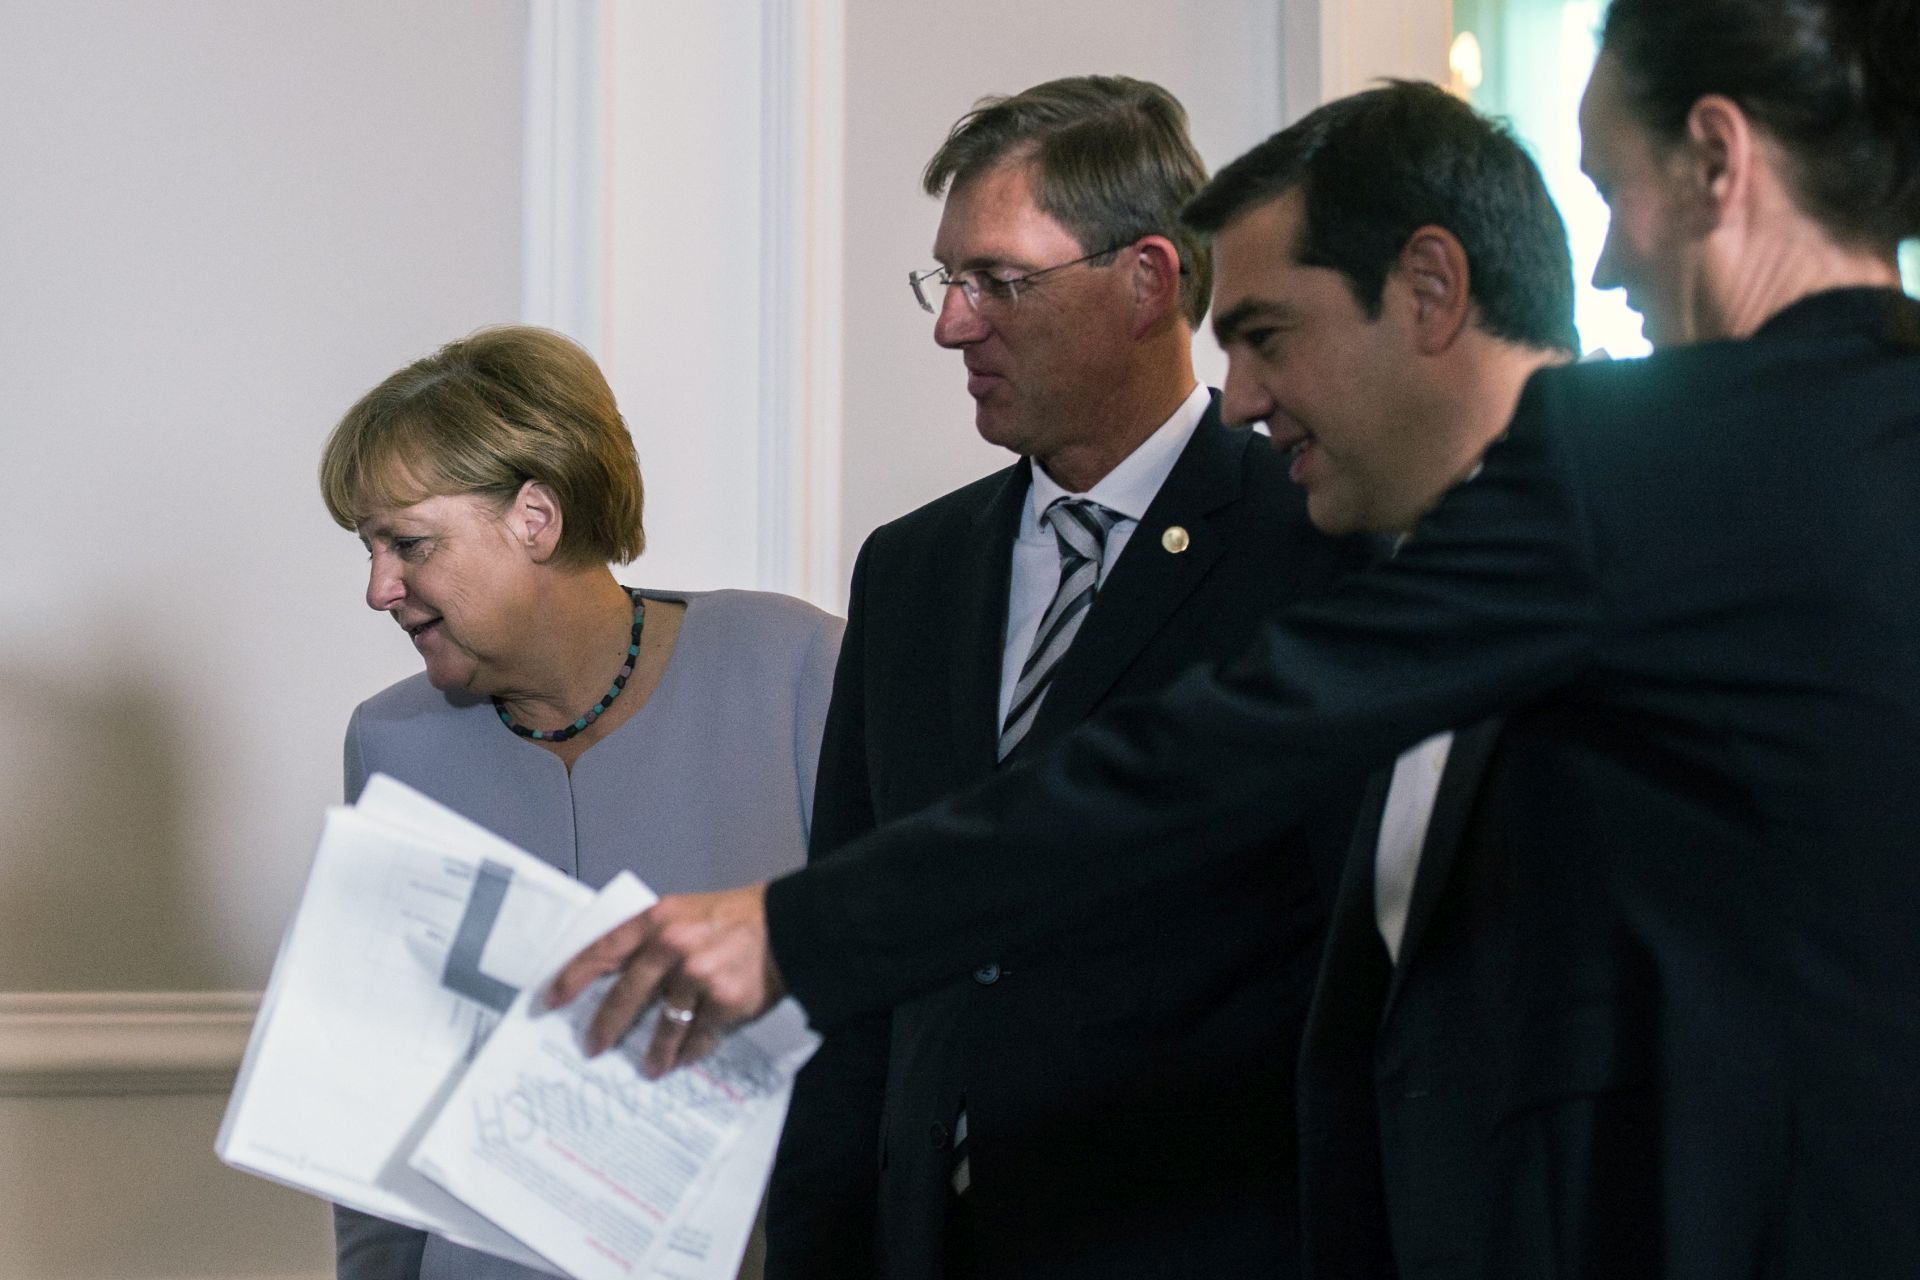 epa05554215 (L-R) German Chancellor Angela Merkel, Slovenian Prime Minister Miro Cerar and Greek Prime Minister Alexis Tsipras arrive for a group photo call during the Summit 'Migration along the Balkan route' in Vienna, Austria, 24 September 2016. Austrian Chancellor Christian Kern invited Heads of Government of Albania, Bulgaria, Germany, Greece, Croatia, FYROM (Former Yugoslav Republic of Macedonia), Serbia, Slovenia, Hungary, the President of the European Council, the European Commissioner for Migration and Interior Minister of Romania to discus a common strategy for the migrants situation along the Balkan route.  EPA/CHRISTIAN BRUNA